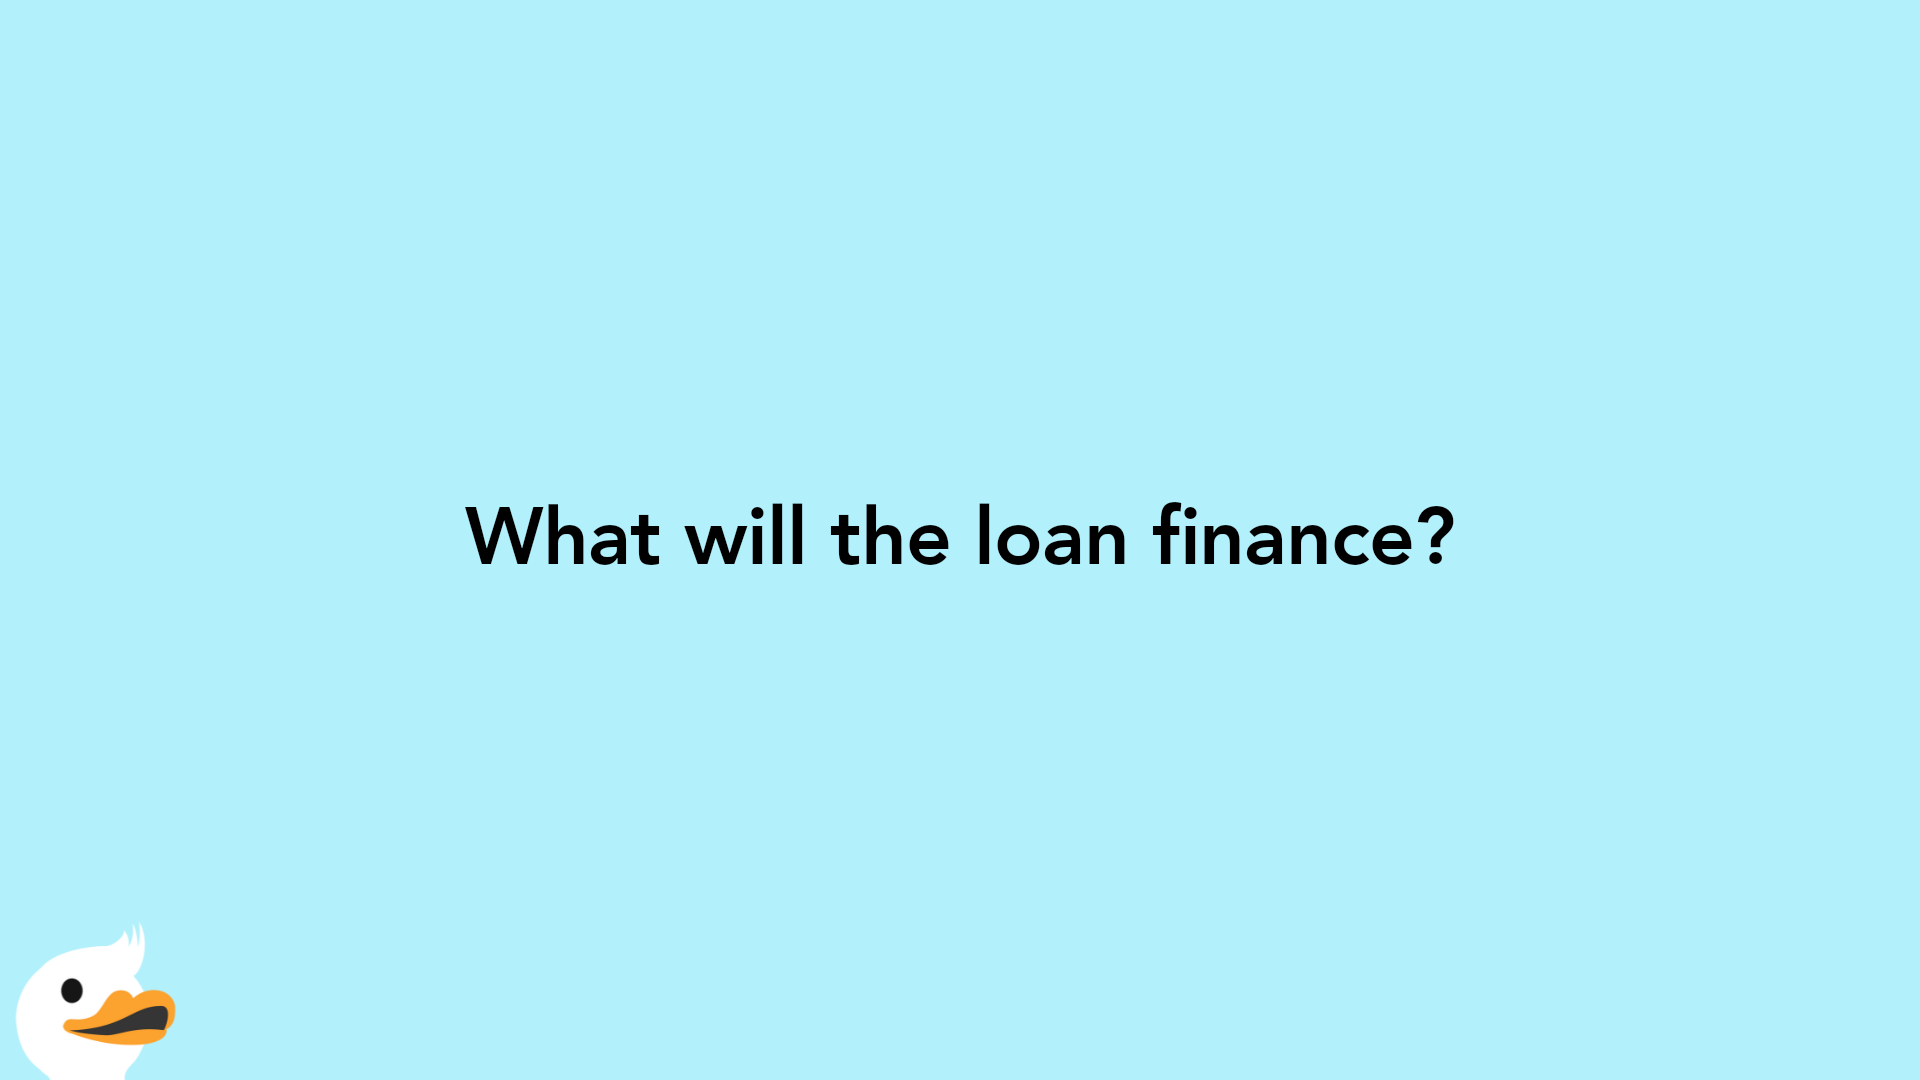 What will the loan finance?